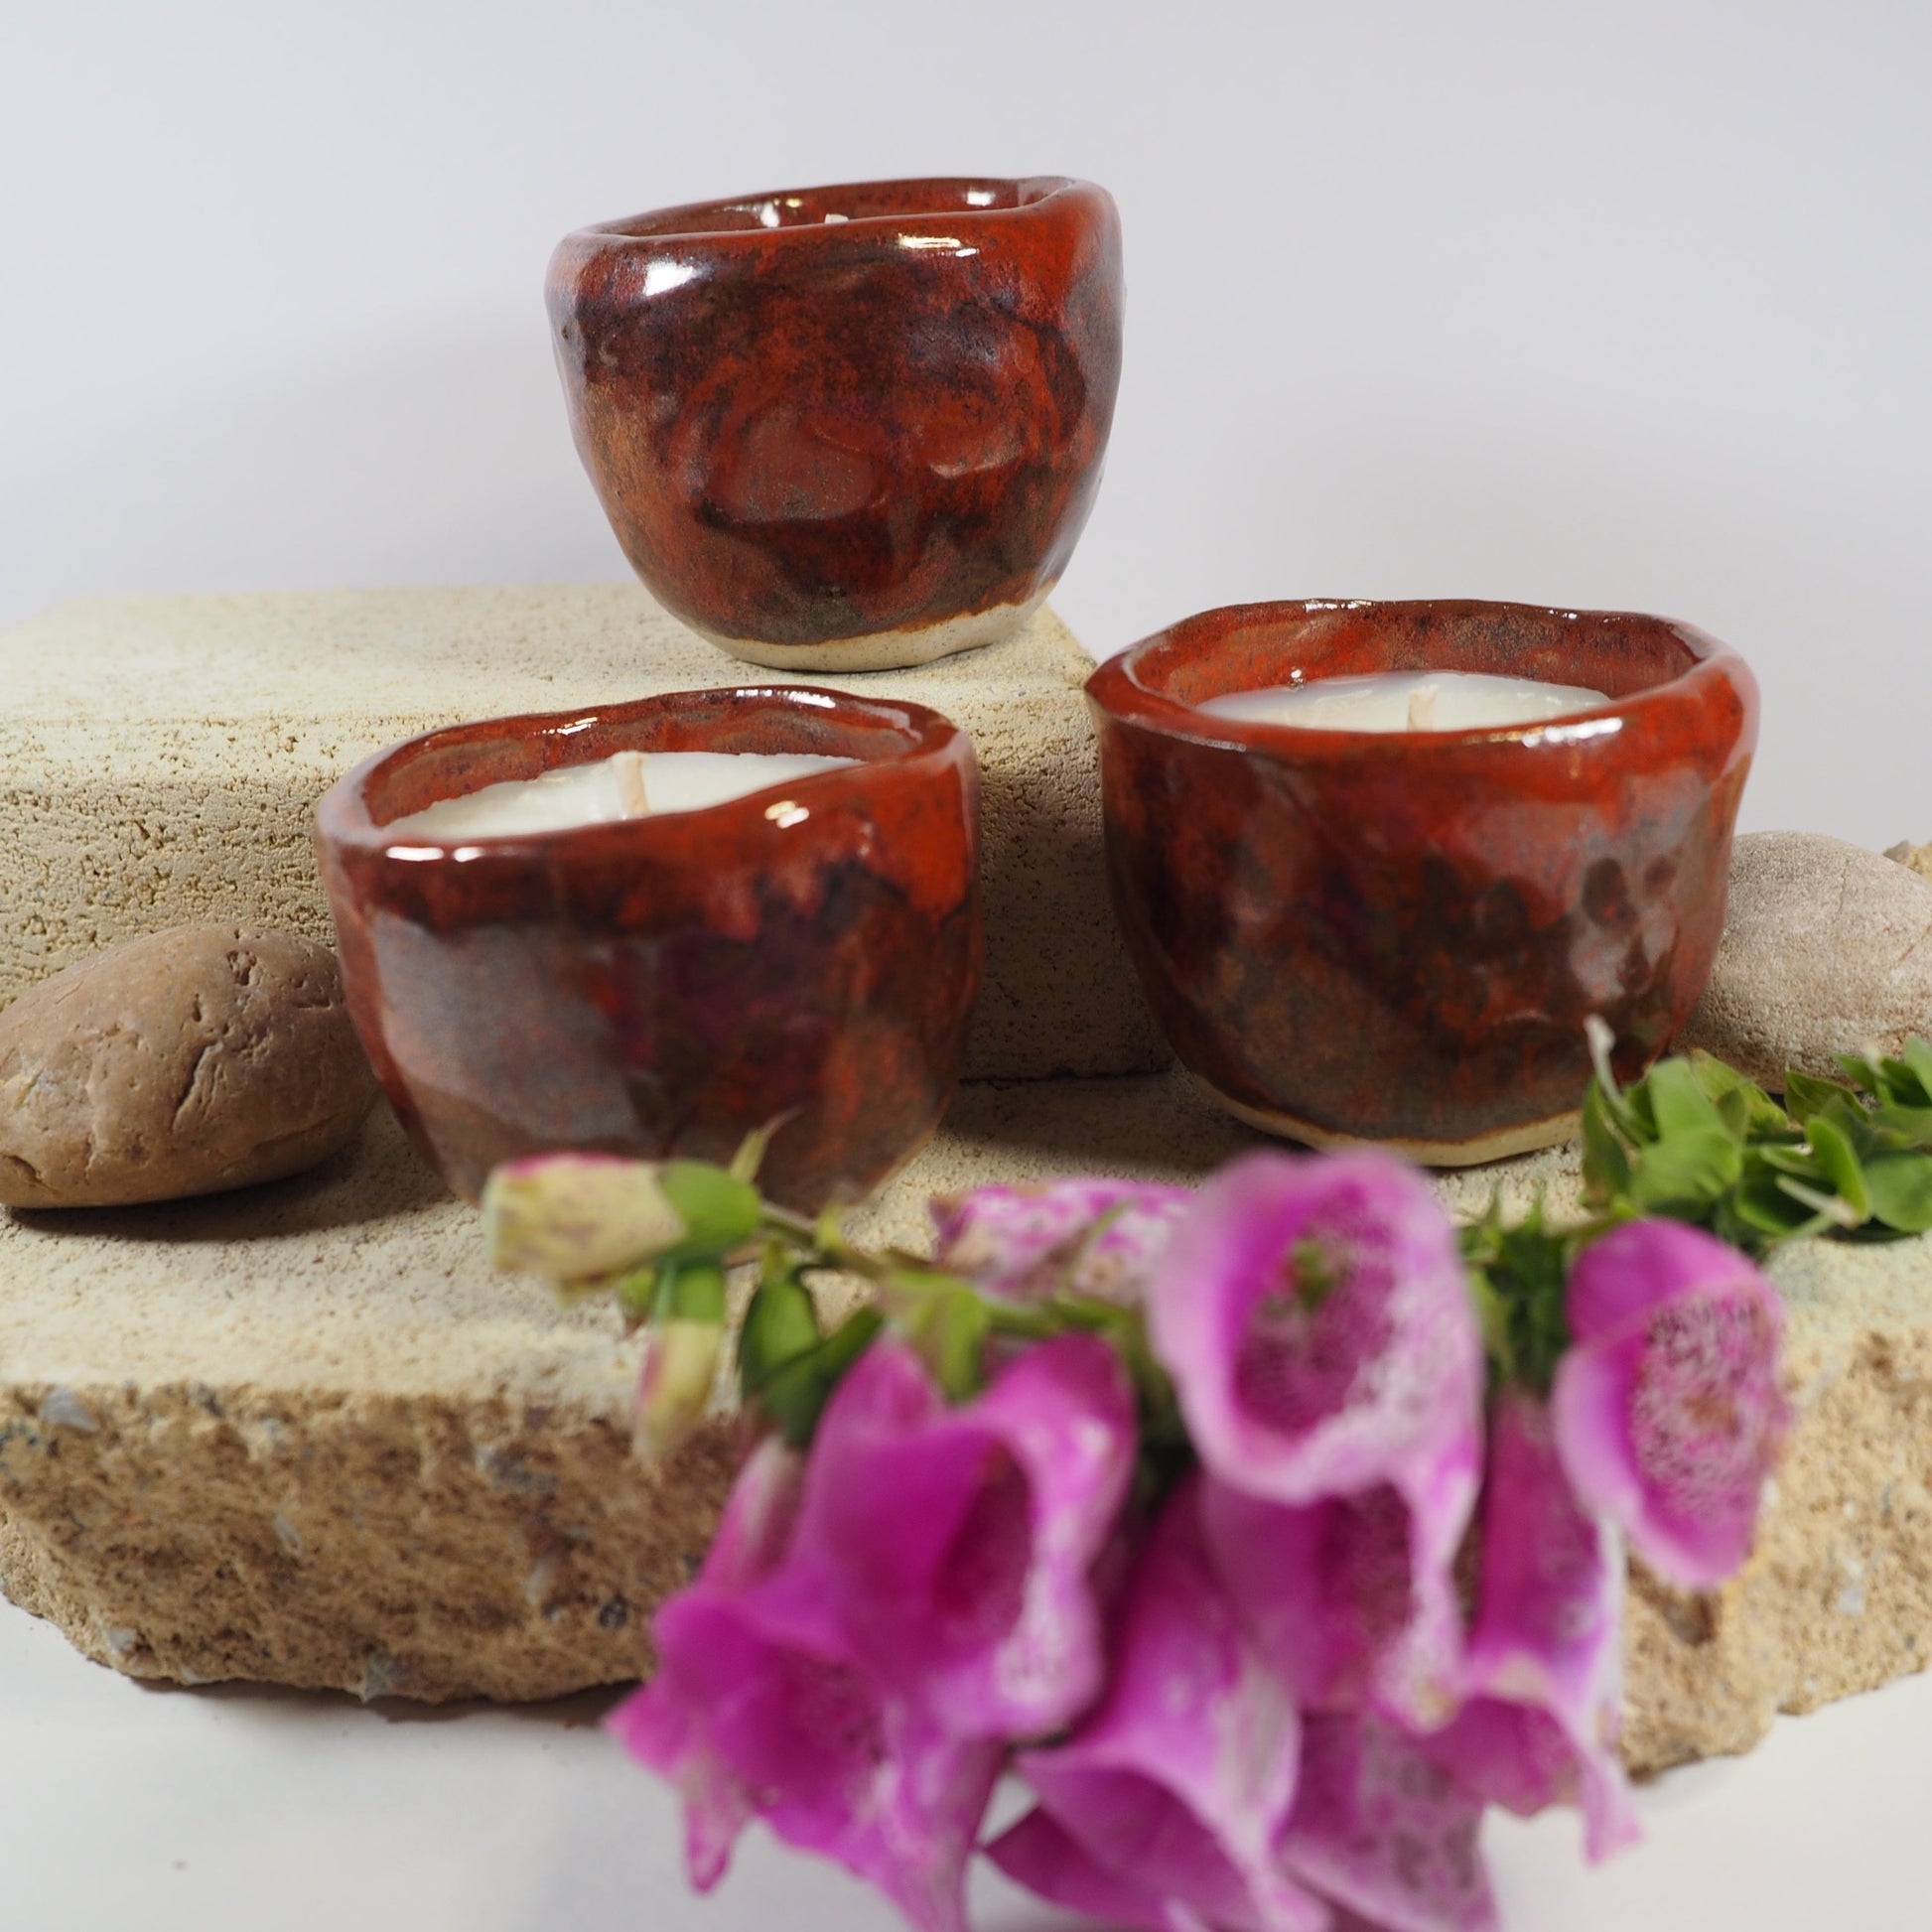 Ceramic bisque fired candle pots in tomato red glaze filled with coconut and soy wax